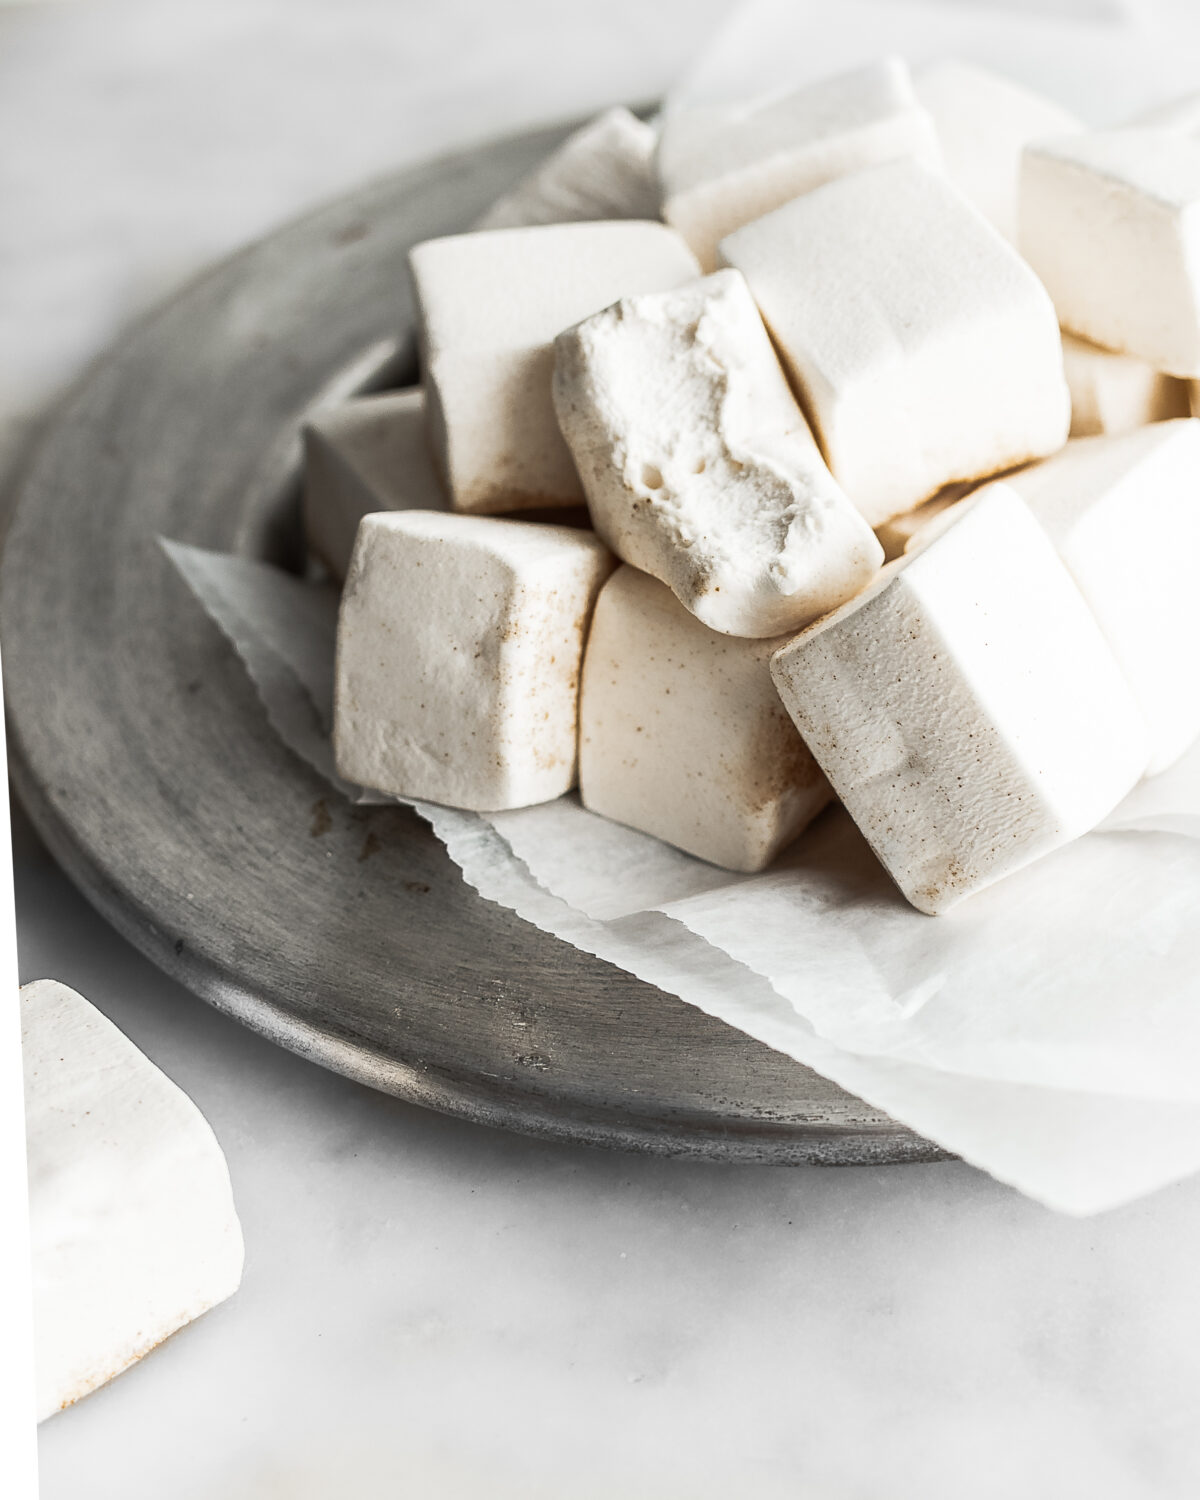 Honey, combined with vanilla, gives these marshmallows a subtle floral flavor. (Jennifer McGruther)